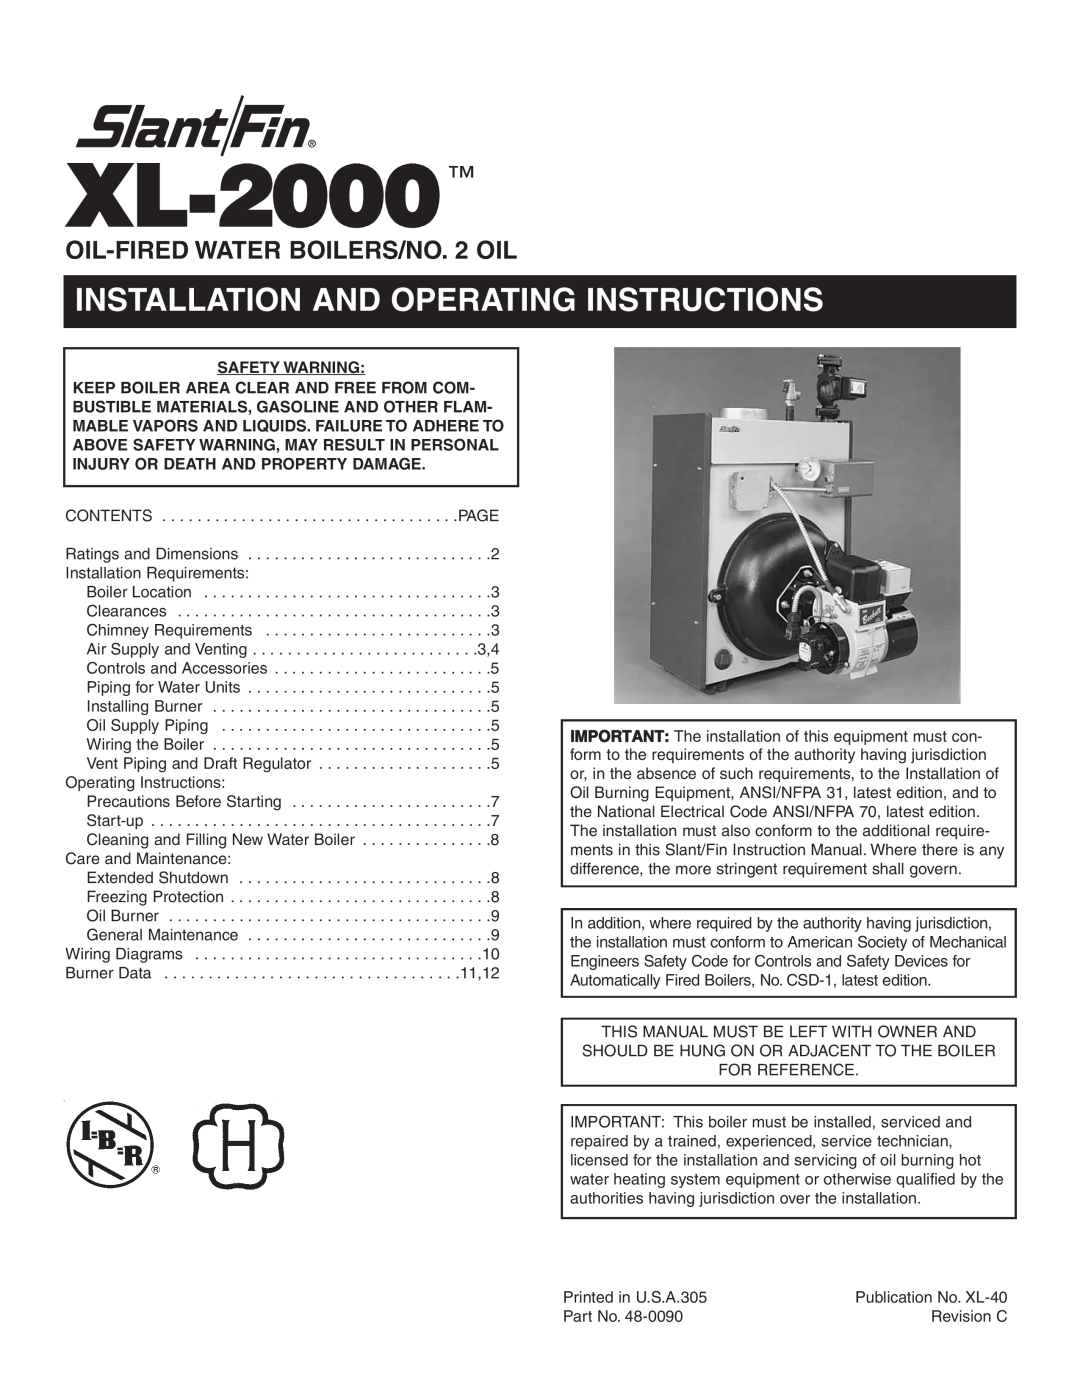 Slant/Fin XL-2000 dimensions Safety Warning, Installation And Operating Instructions, OIL-FIREDWATER BOILERS/NO. 2 OIL 